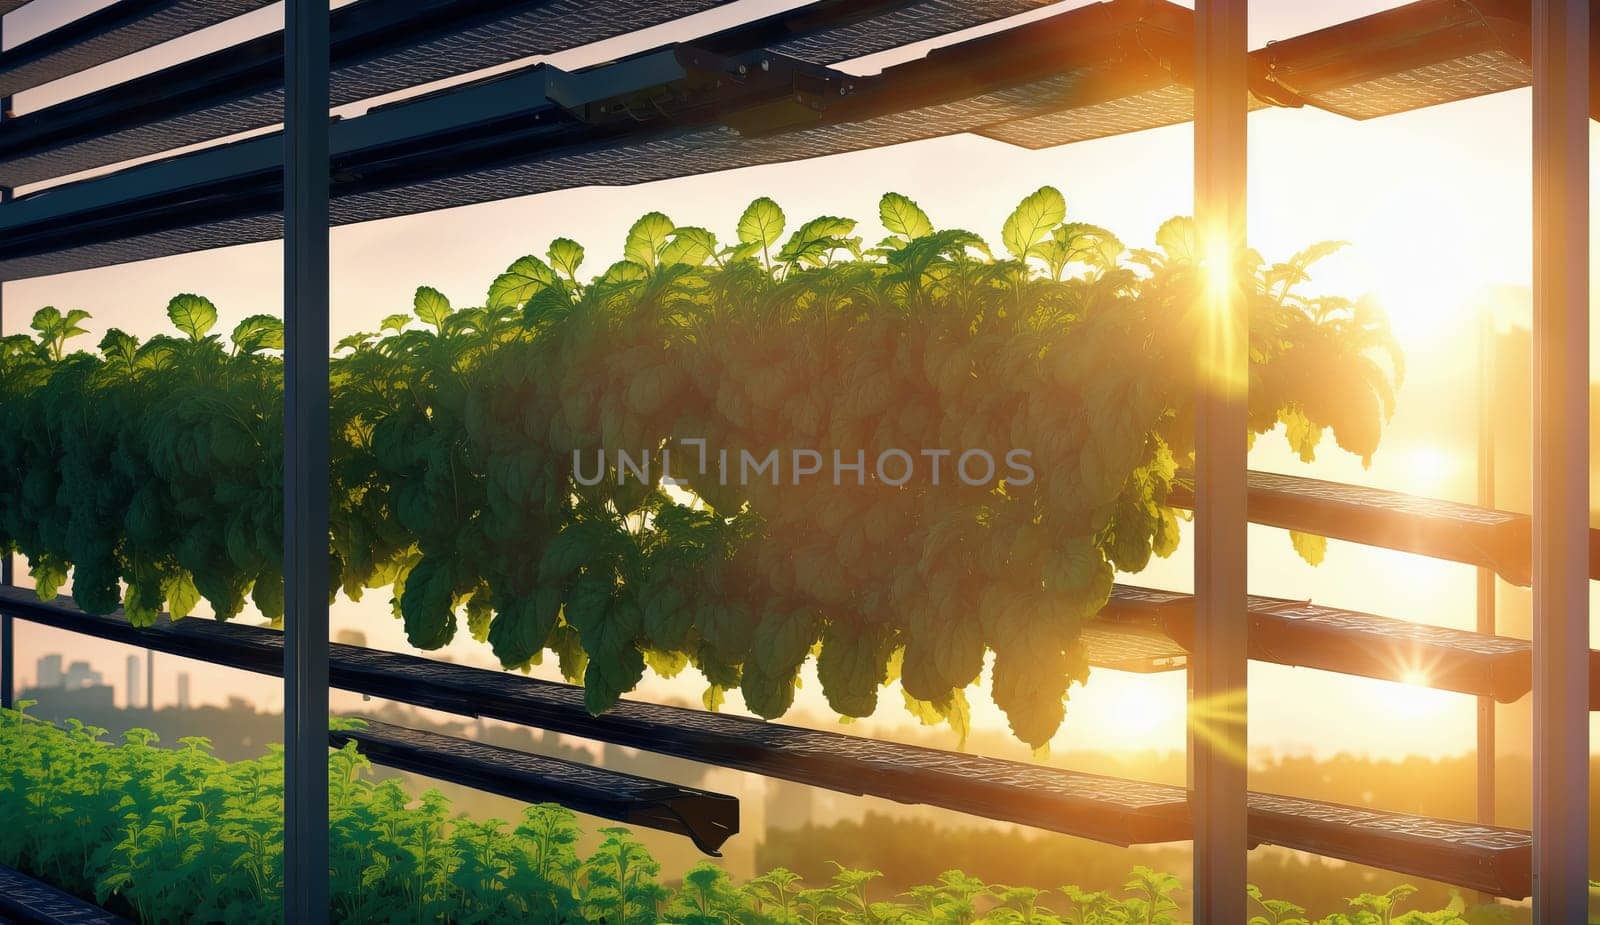 Plants line the greenhouse, basking in sunlight filtering through the windows by DCStudio